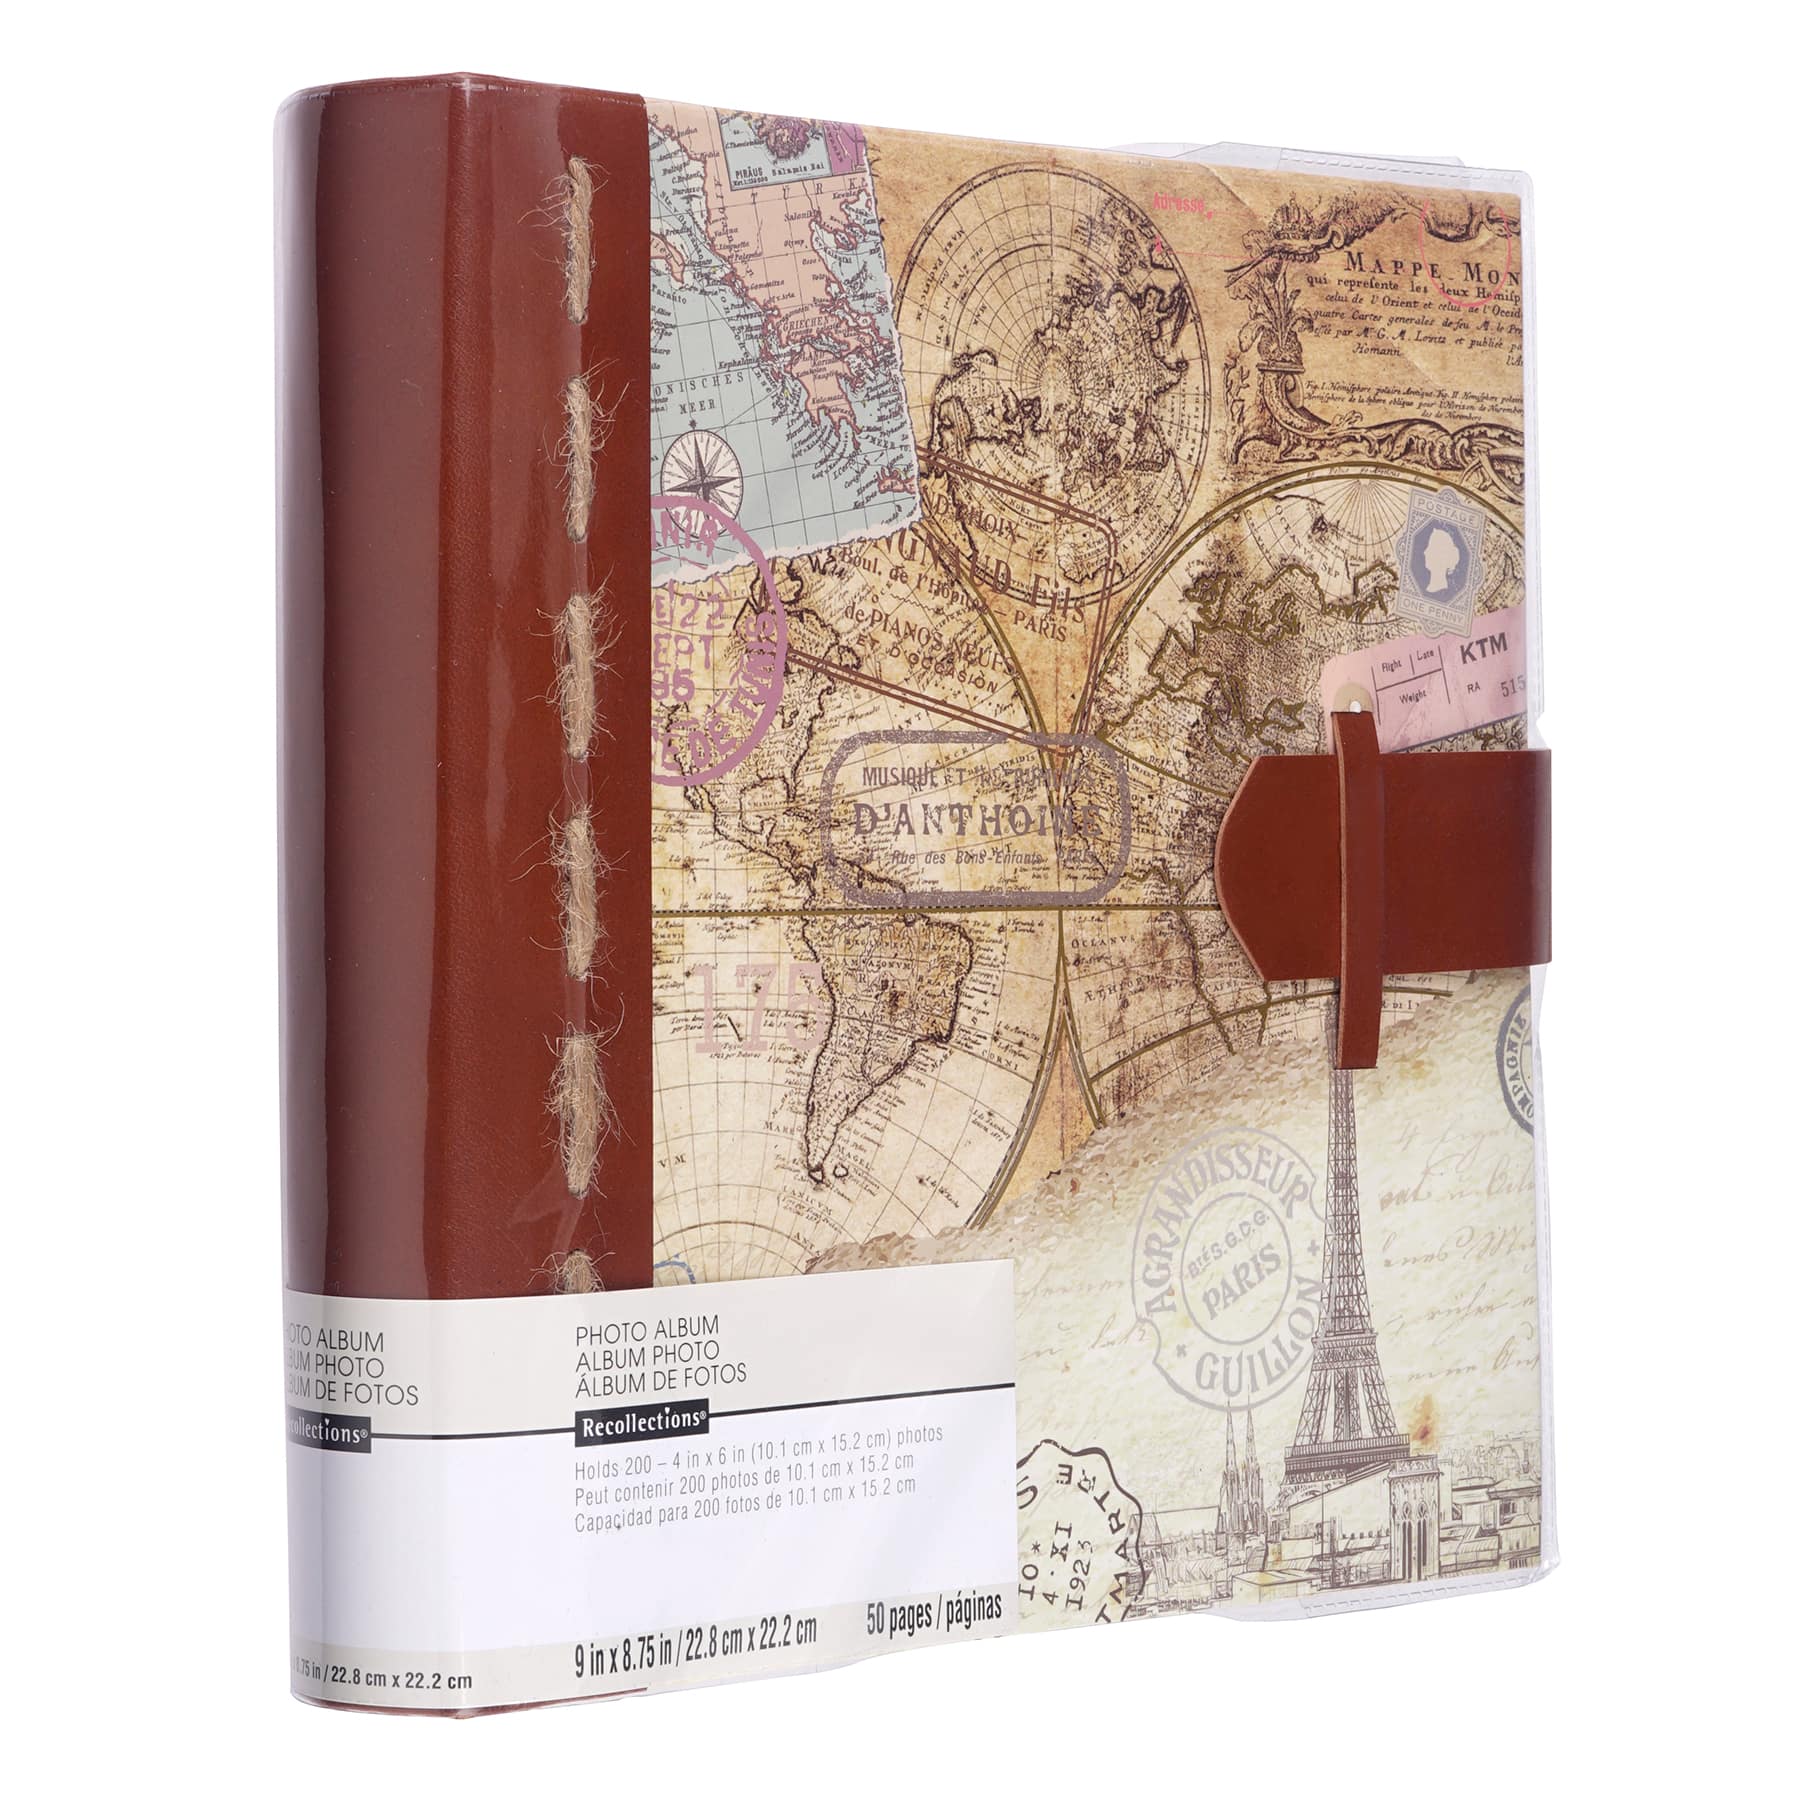 Travel Photo Album by Recollections, Size: 200 Photos, Brown